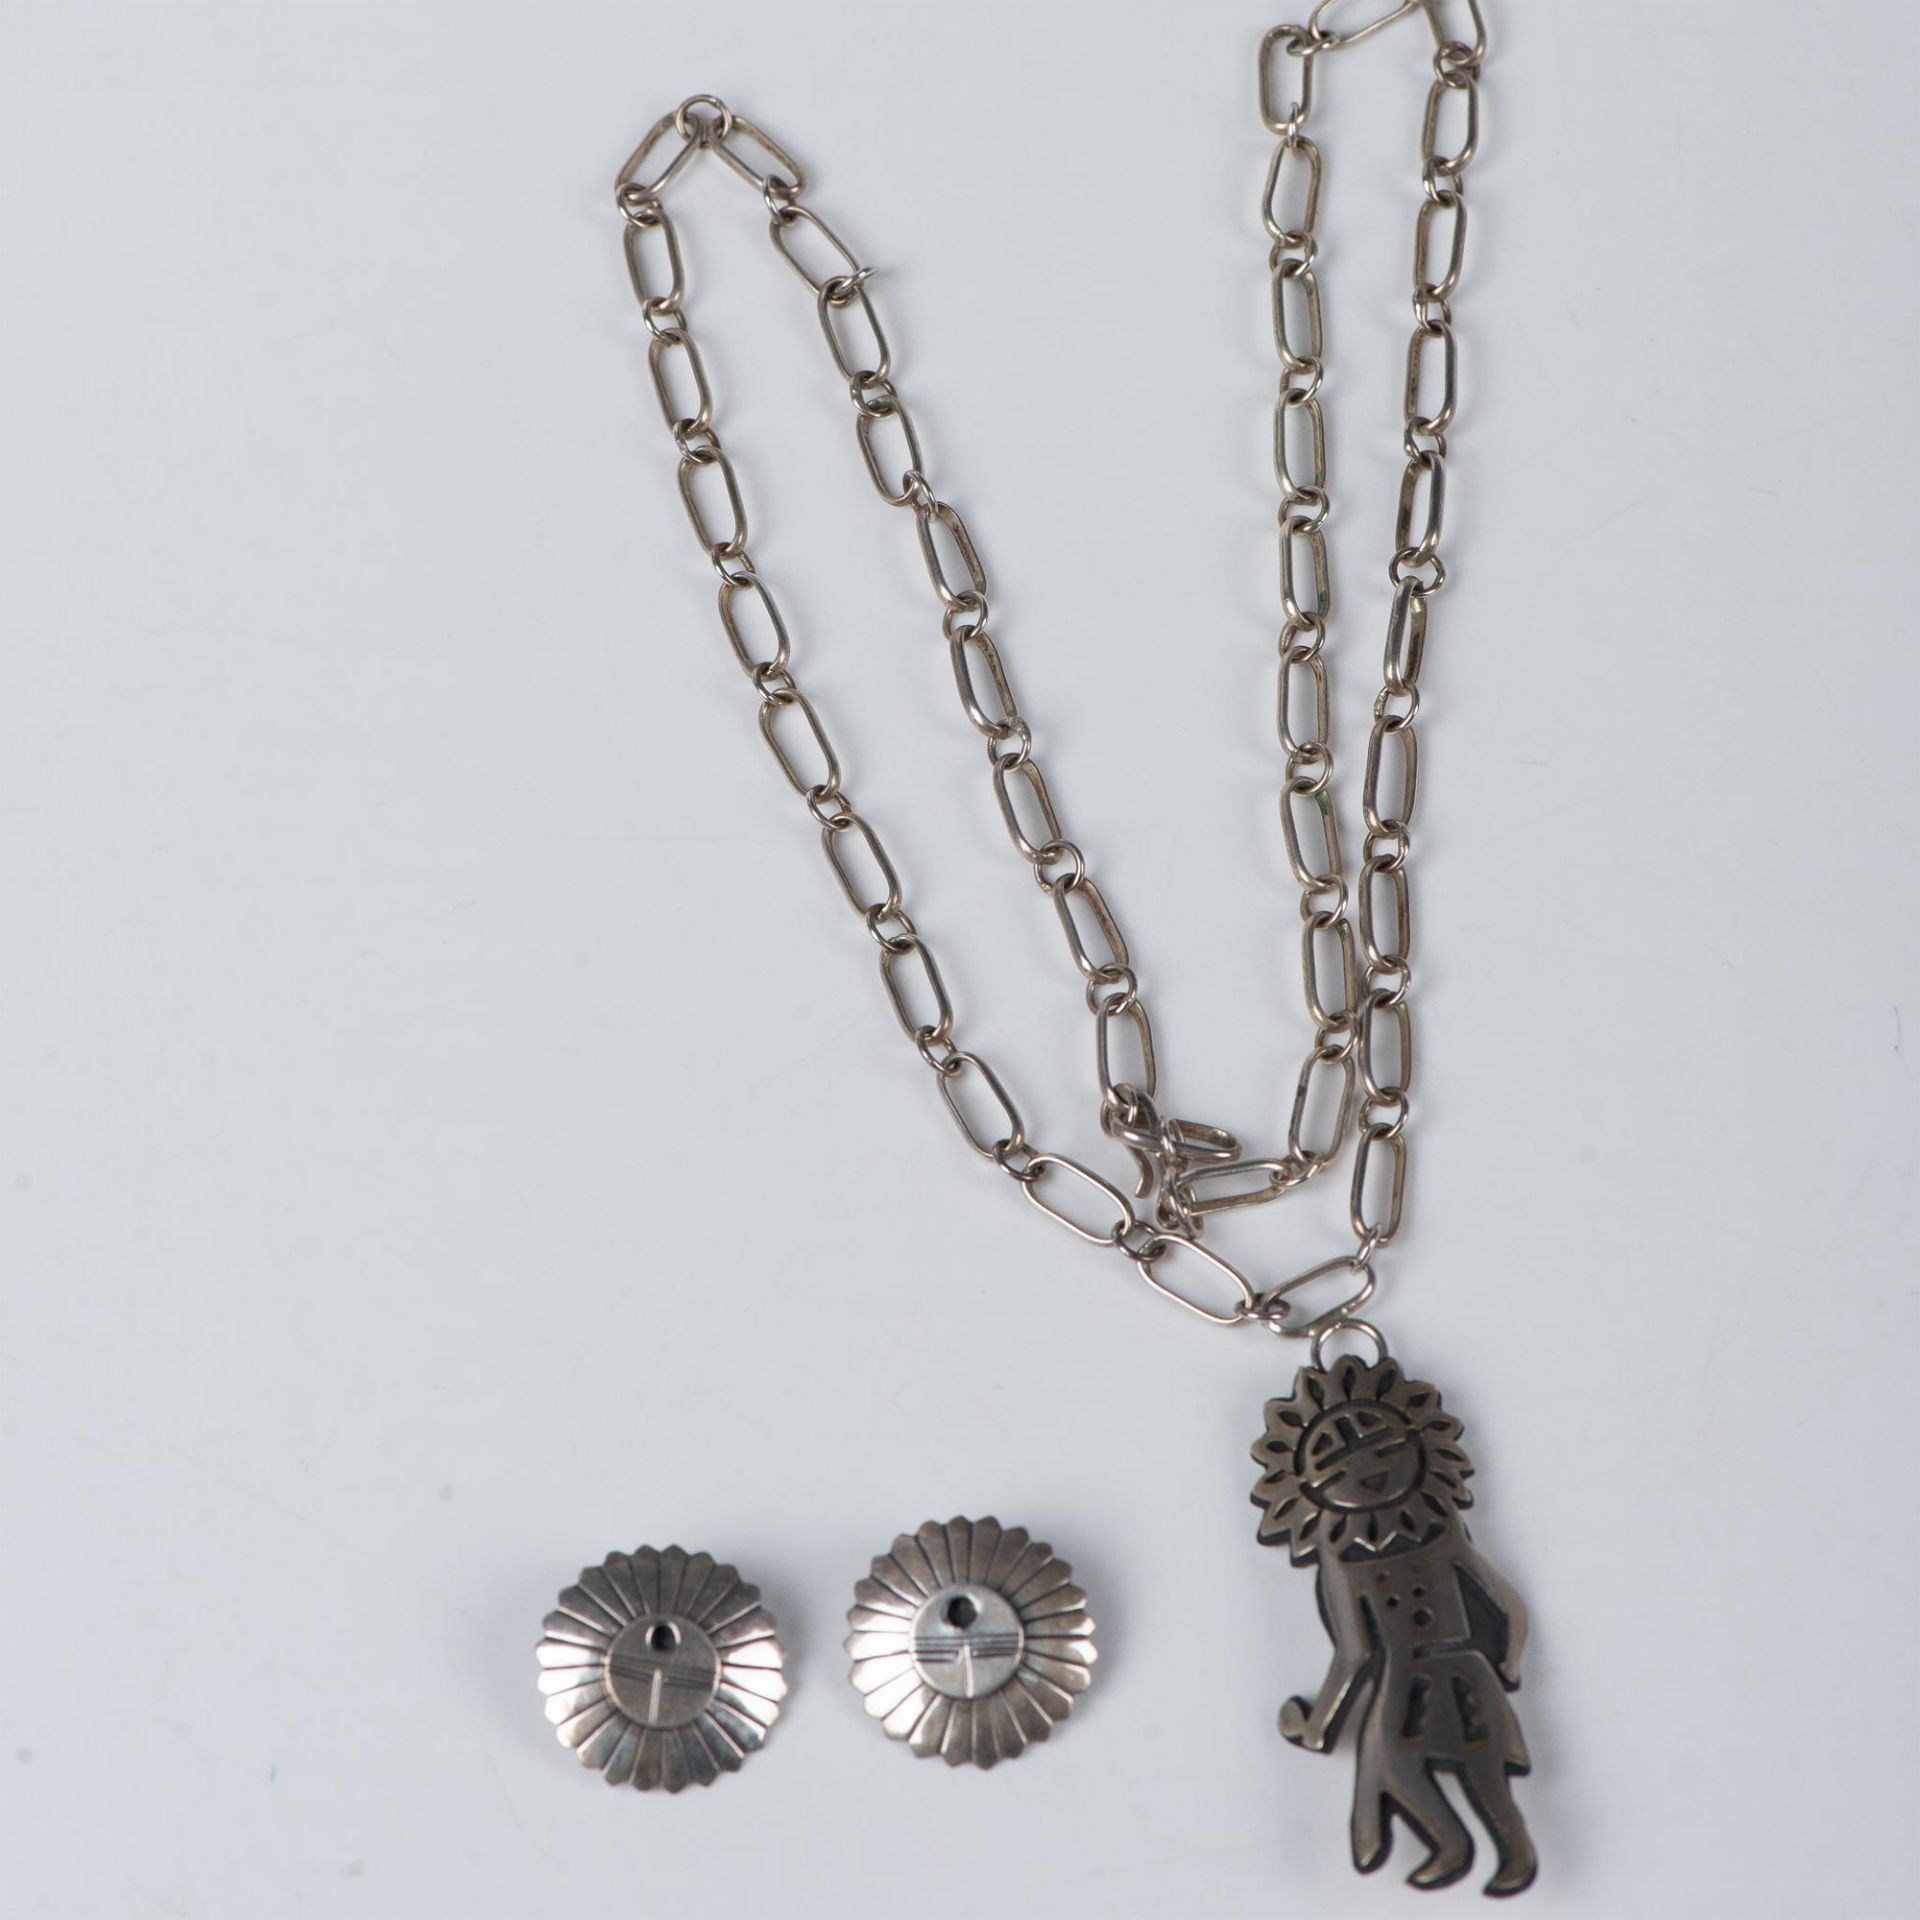 2pc Zuni Sterling Silver Sunface Necklace & Clip-On Earrings - Image 2 of 5